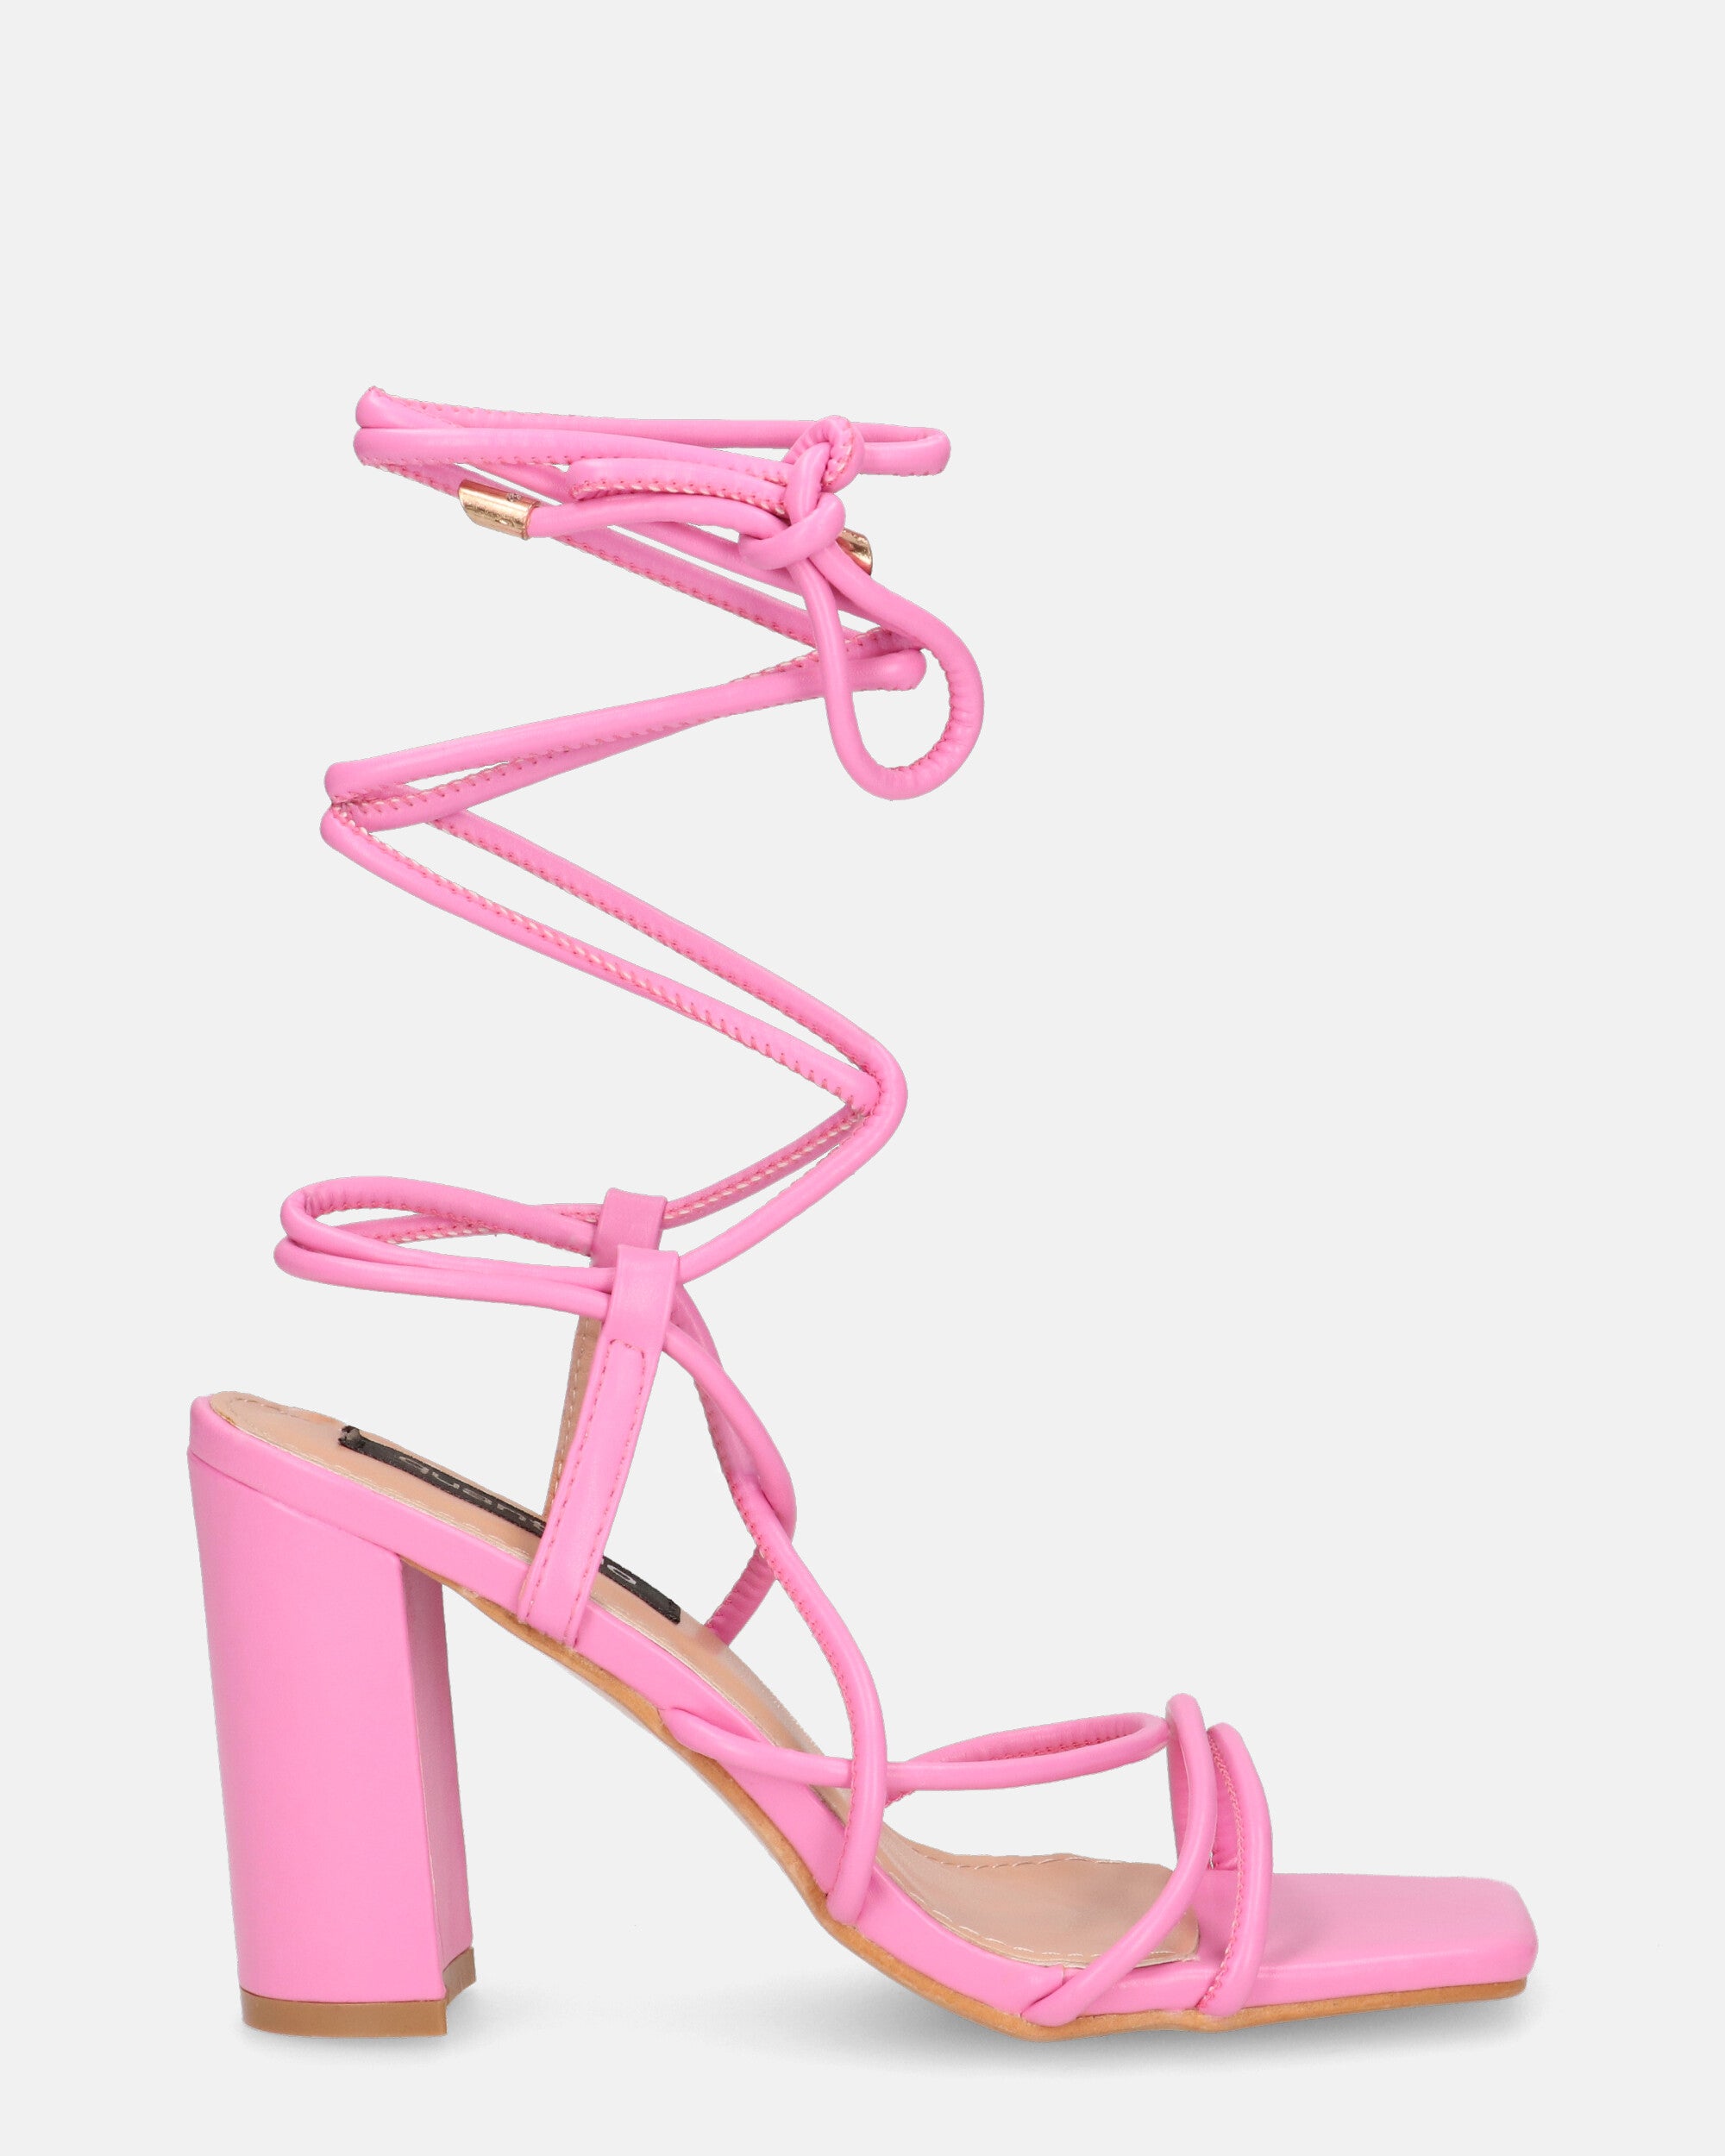 MARISOL - pink heeled sandals with laces